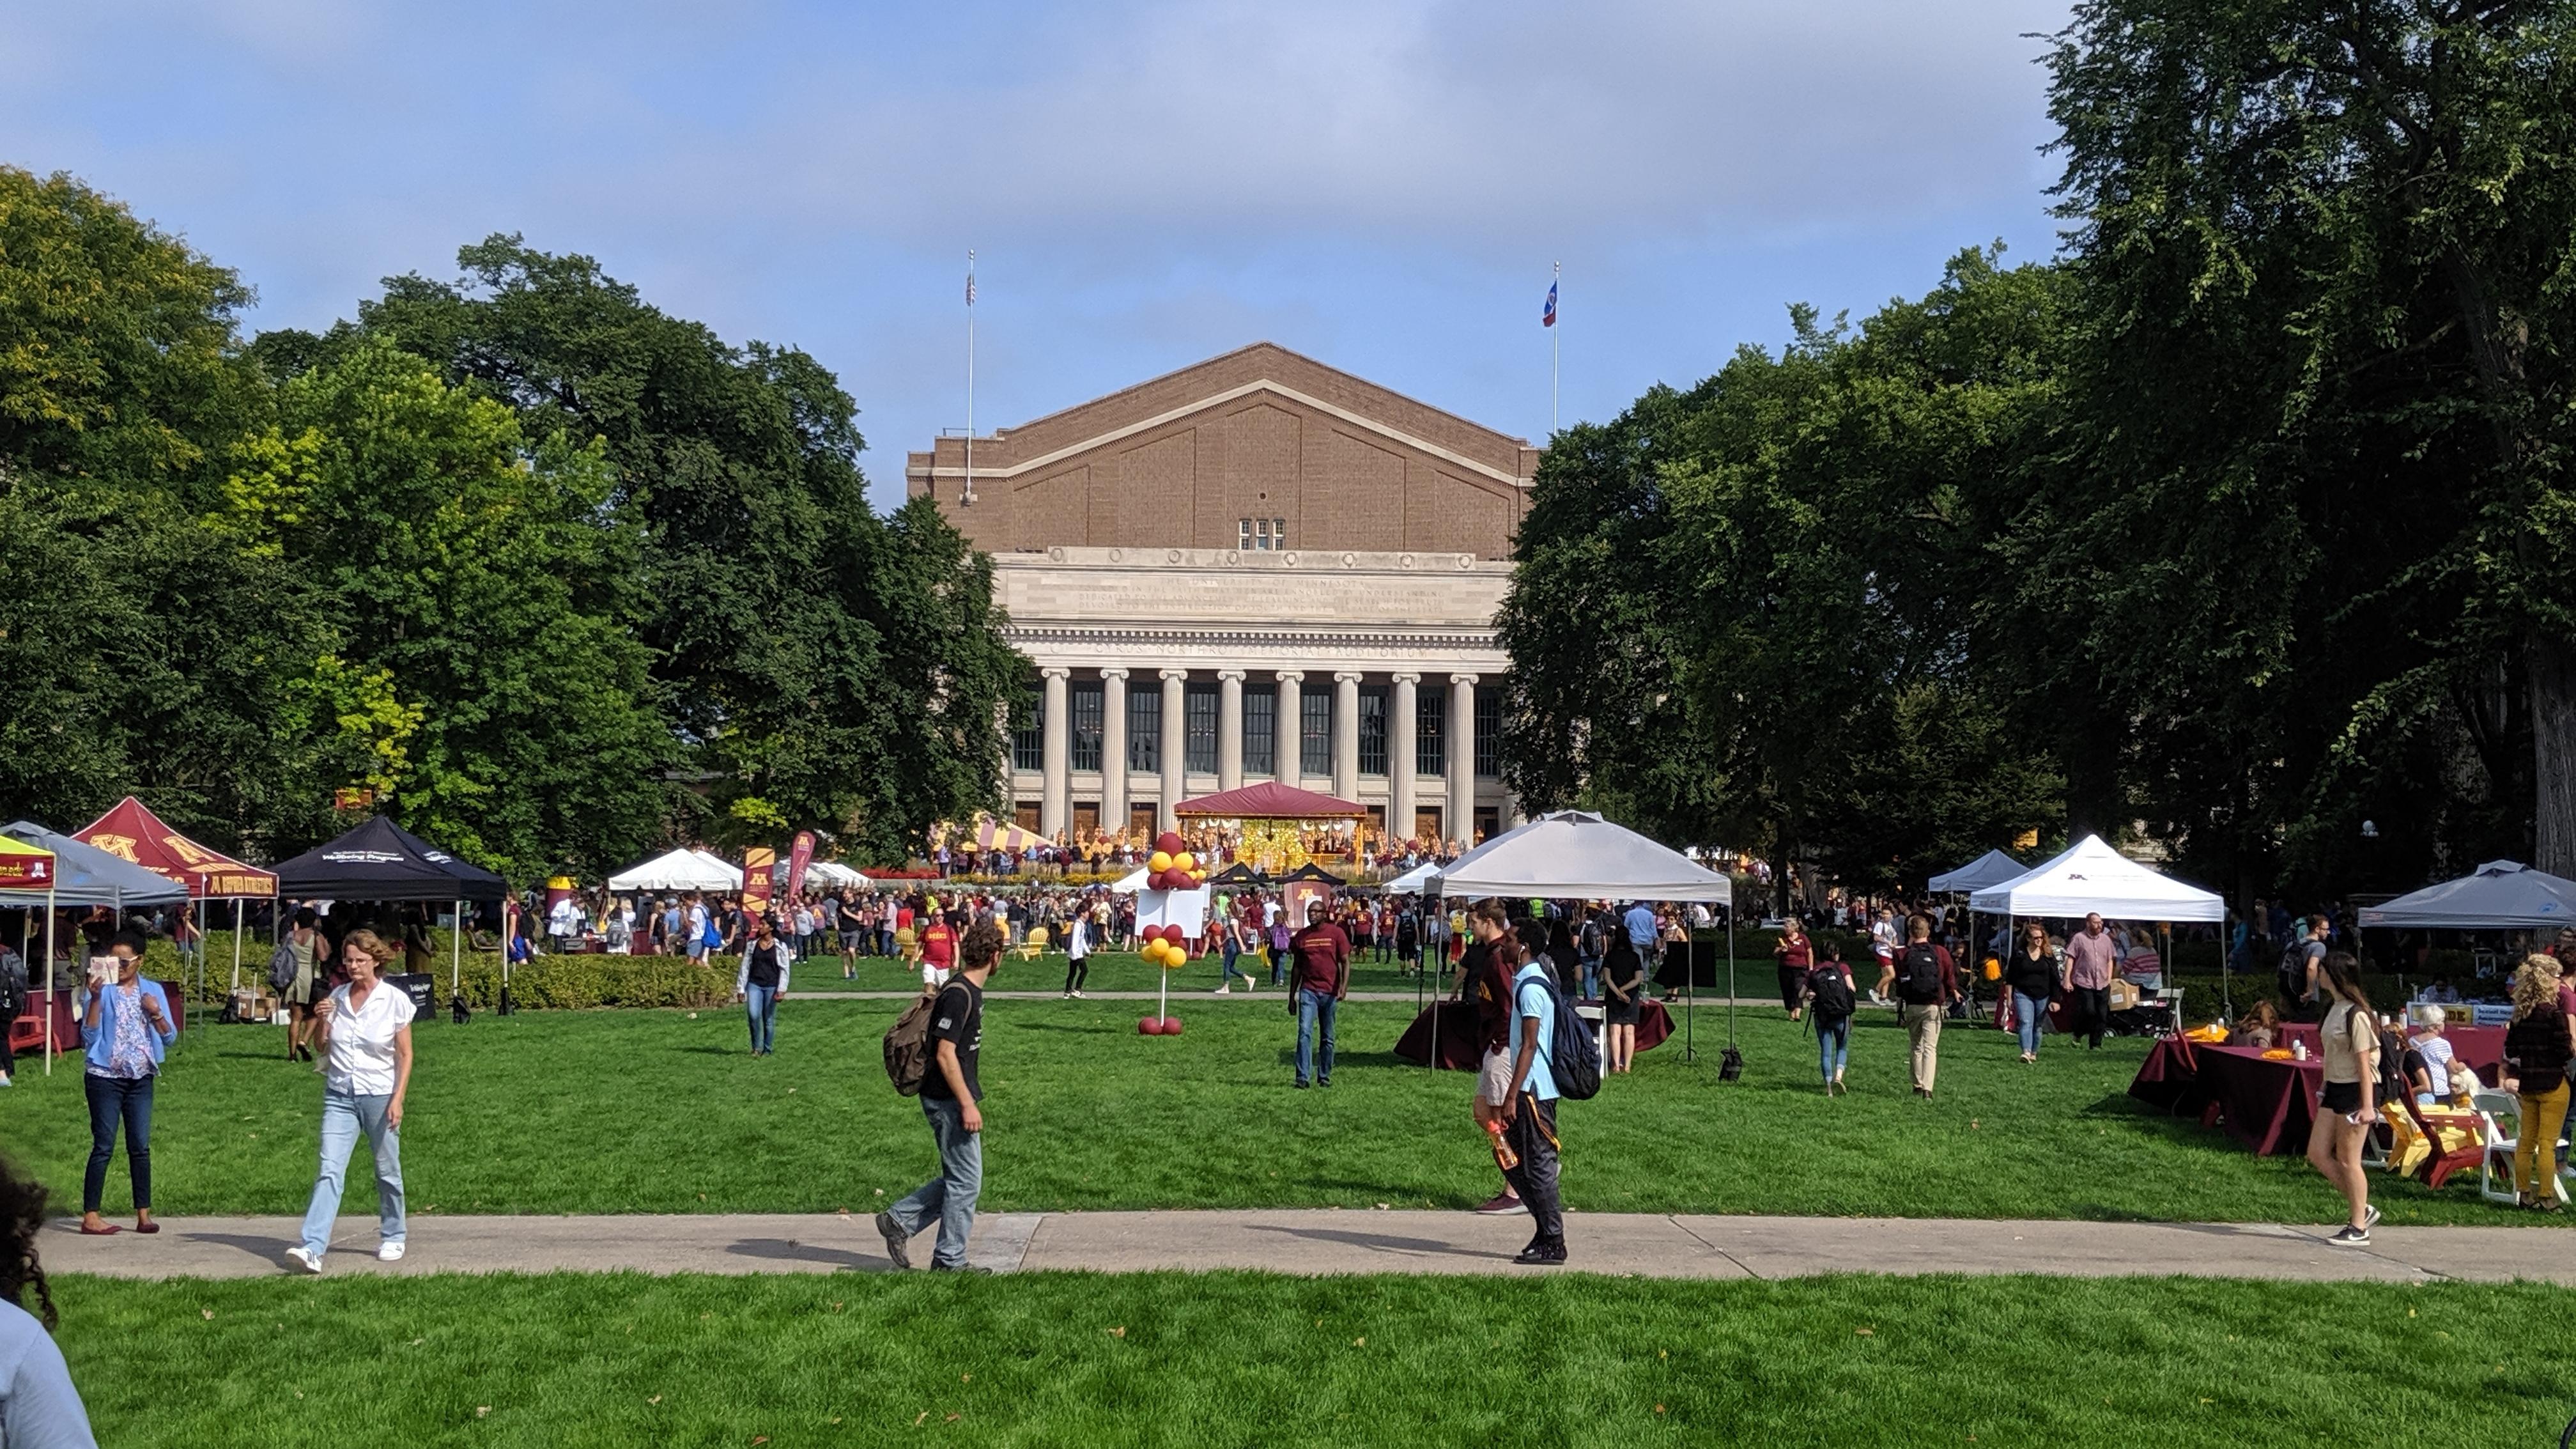 A photograph of the main quadrangle on the campus of the University of Minnesota Twin Cities.